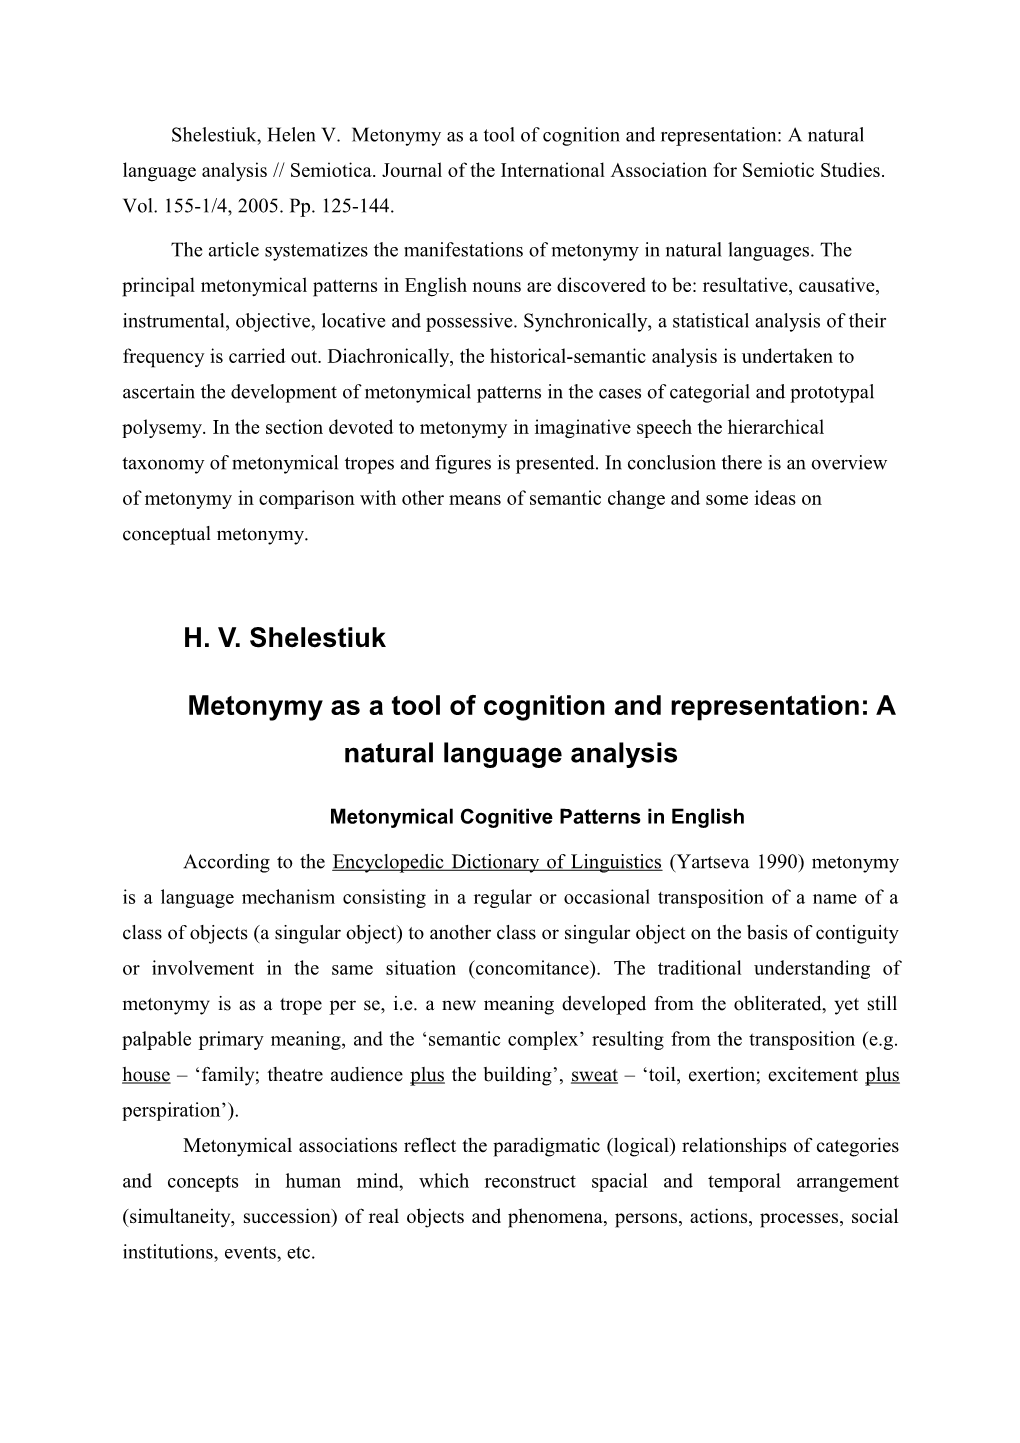 Metonymy As a Tool of Cognition and Representation: a Natural Language Analysis